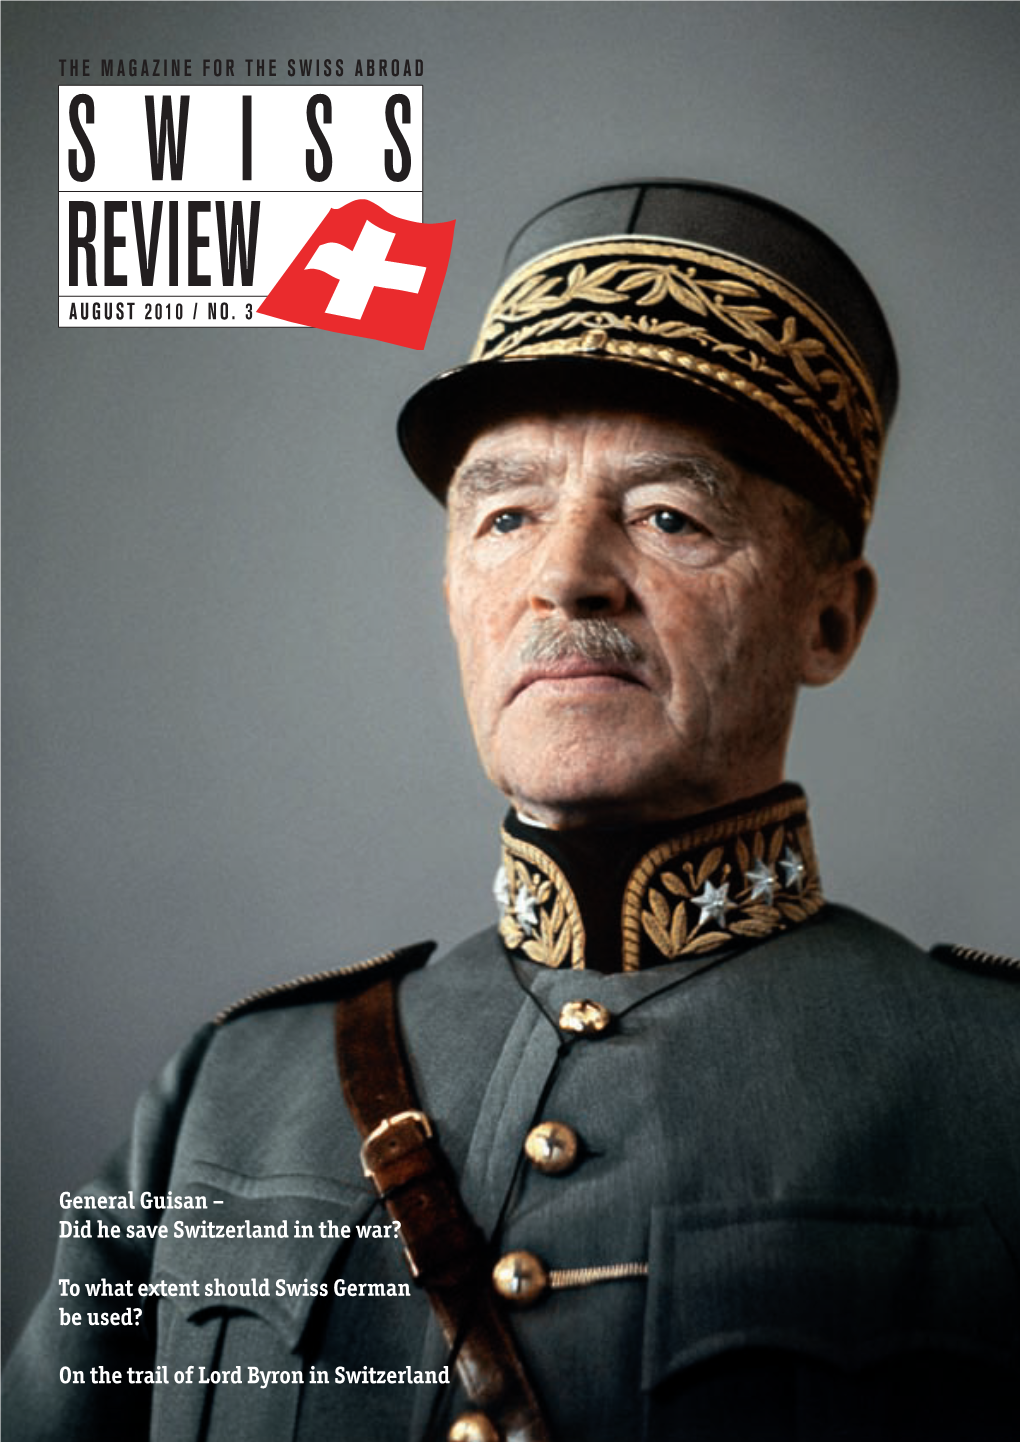 General Guisan – Did He Save Switzerland in the War?